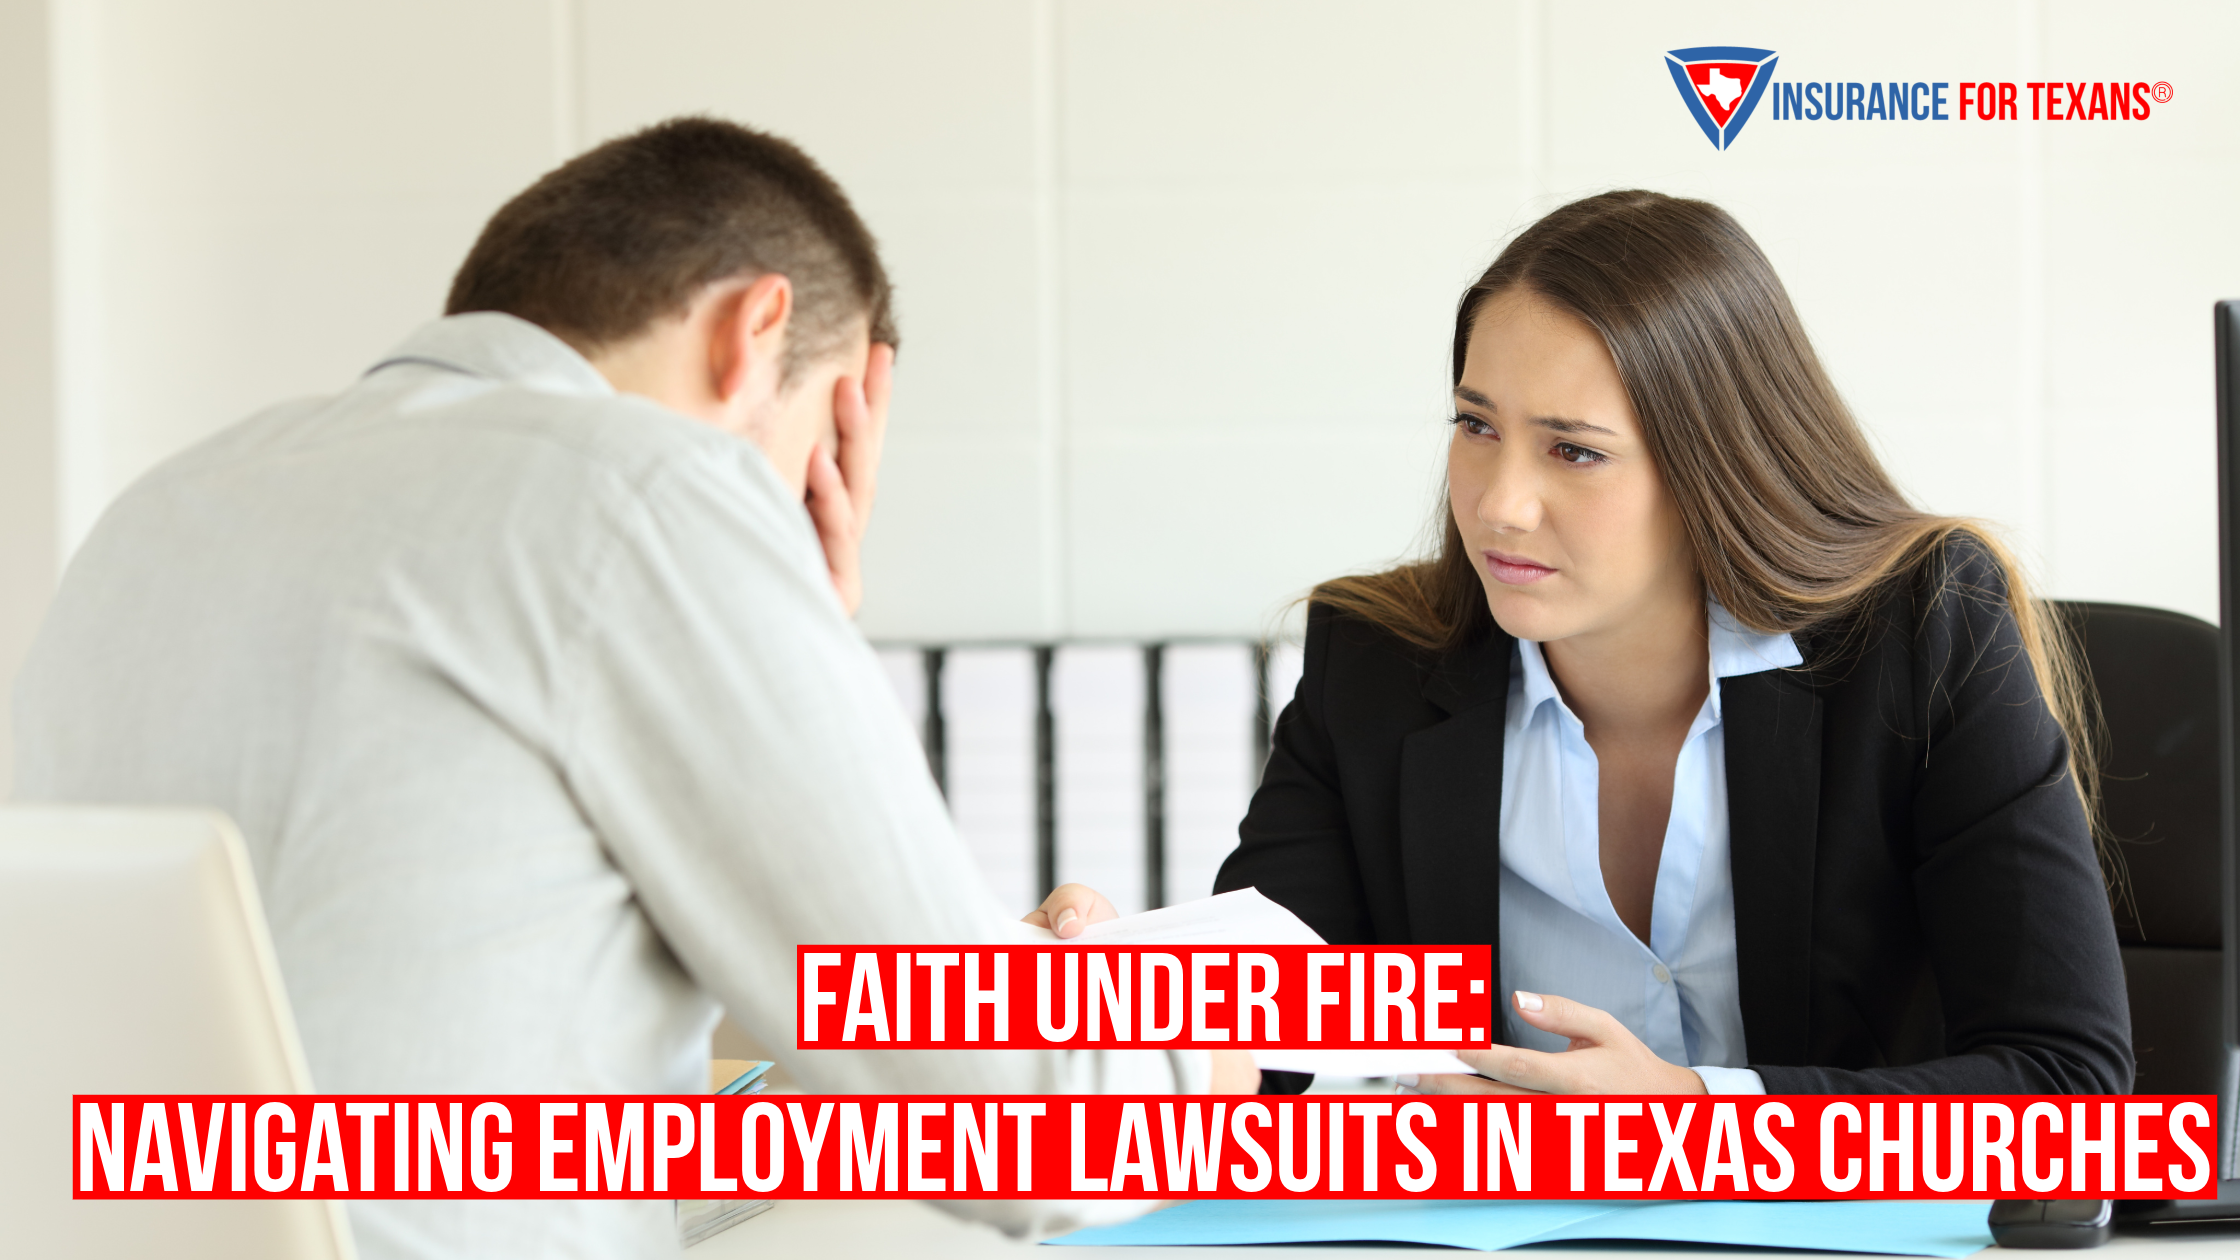 Faith Under Fire: Navigating Employment Lawsuits in Texas Churches